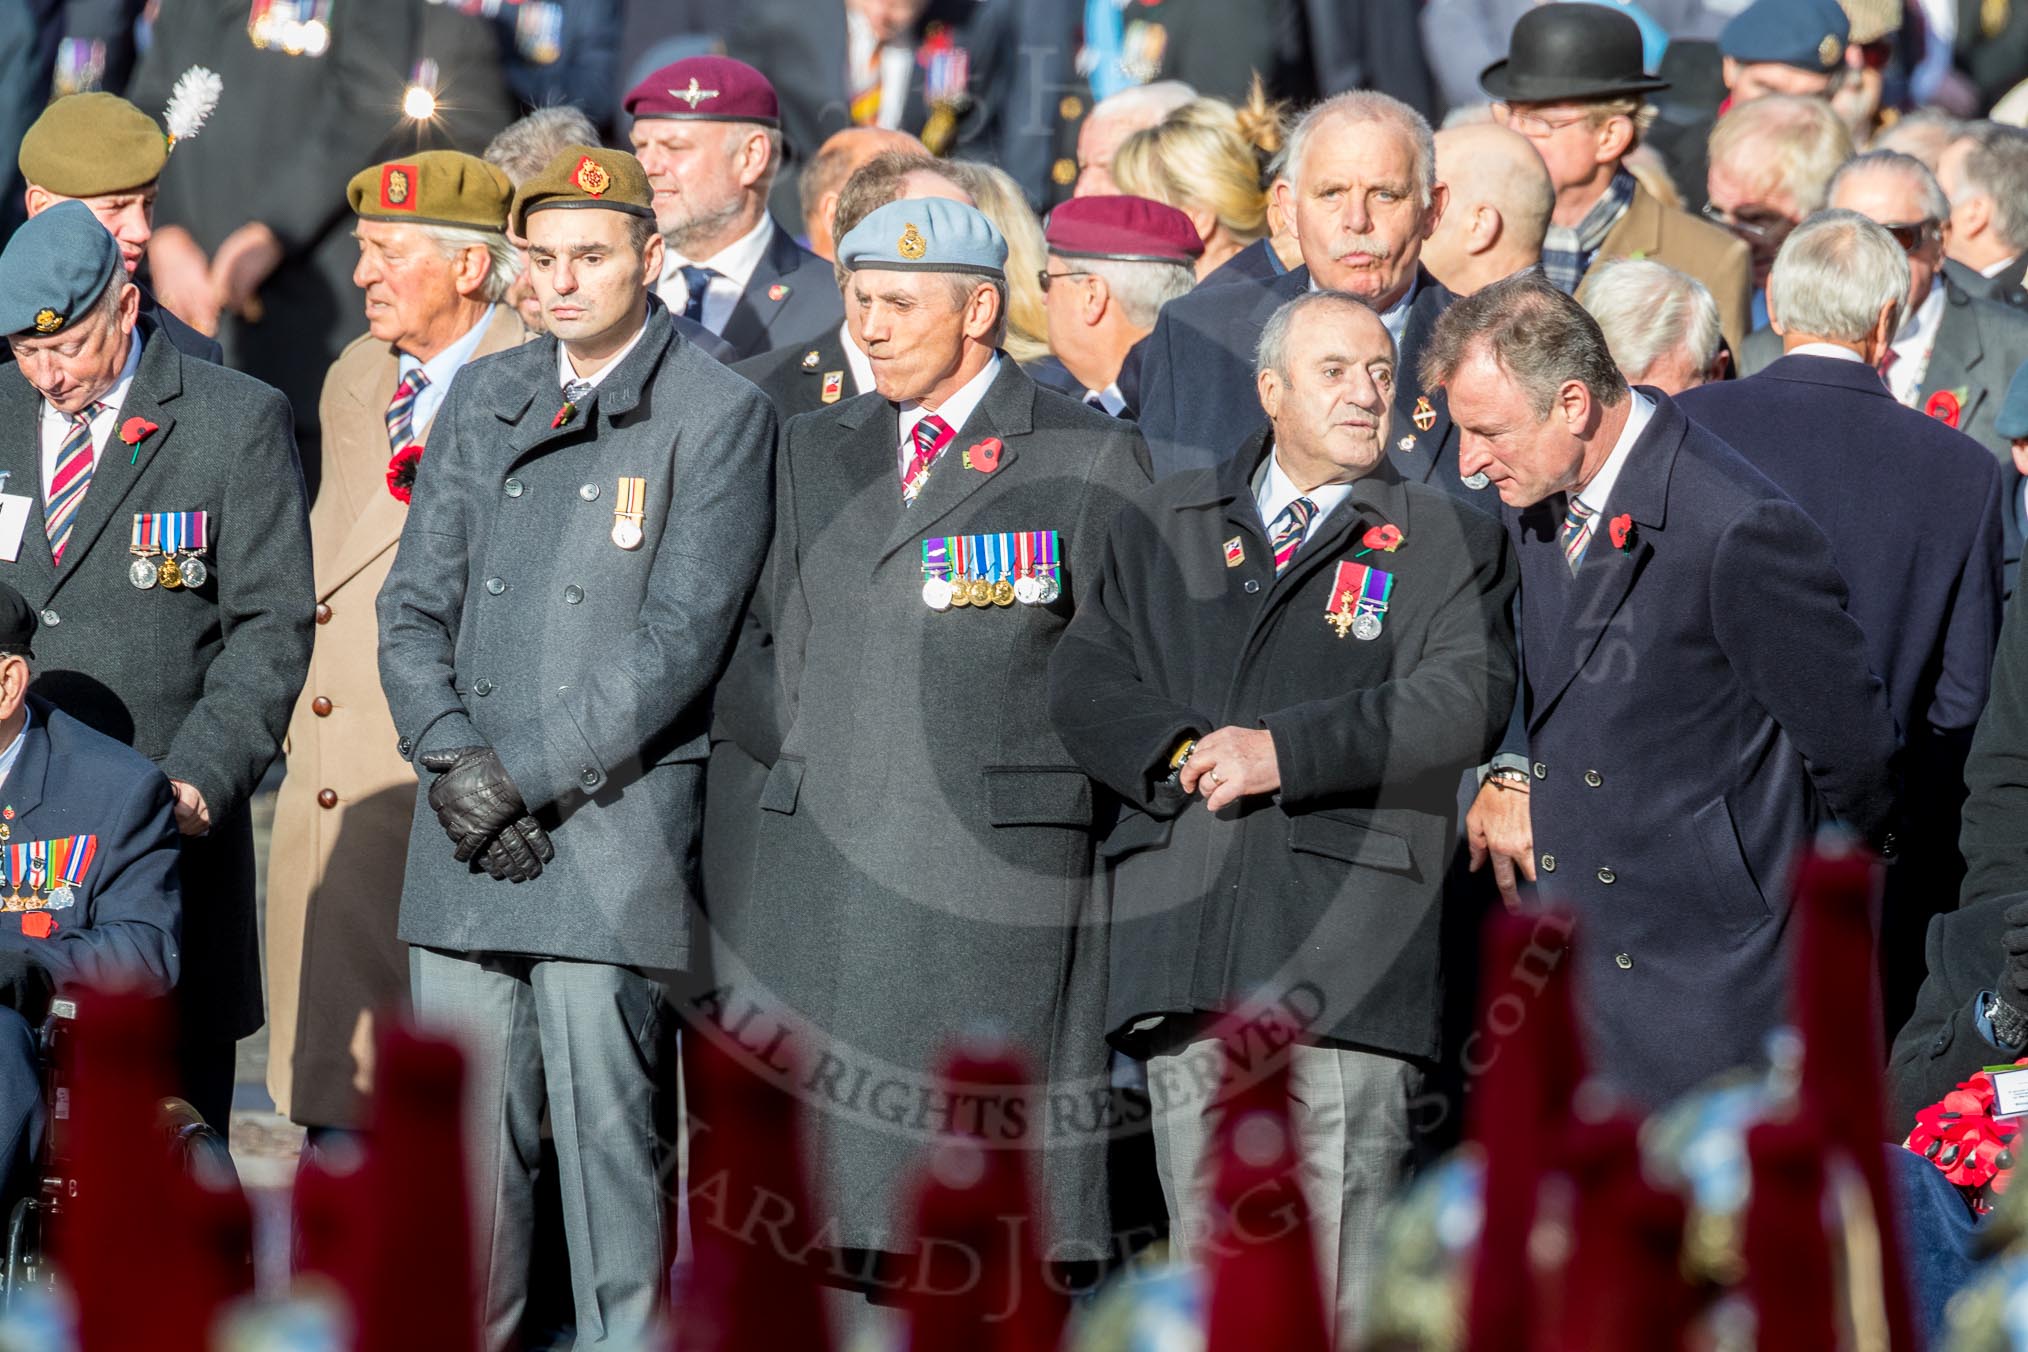 March Past, Remembrance Sunday at the Cenotaph 2016.
Cenotaph, Whitehall, London SW1,
London,
Greater London,
United Kingdom,
on 13 November 2016 at 12:34, image #352